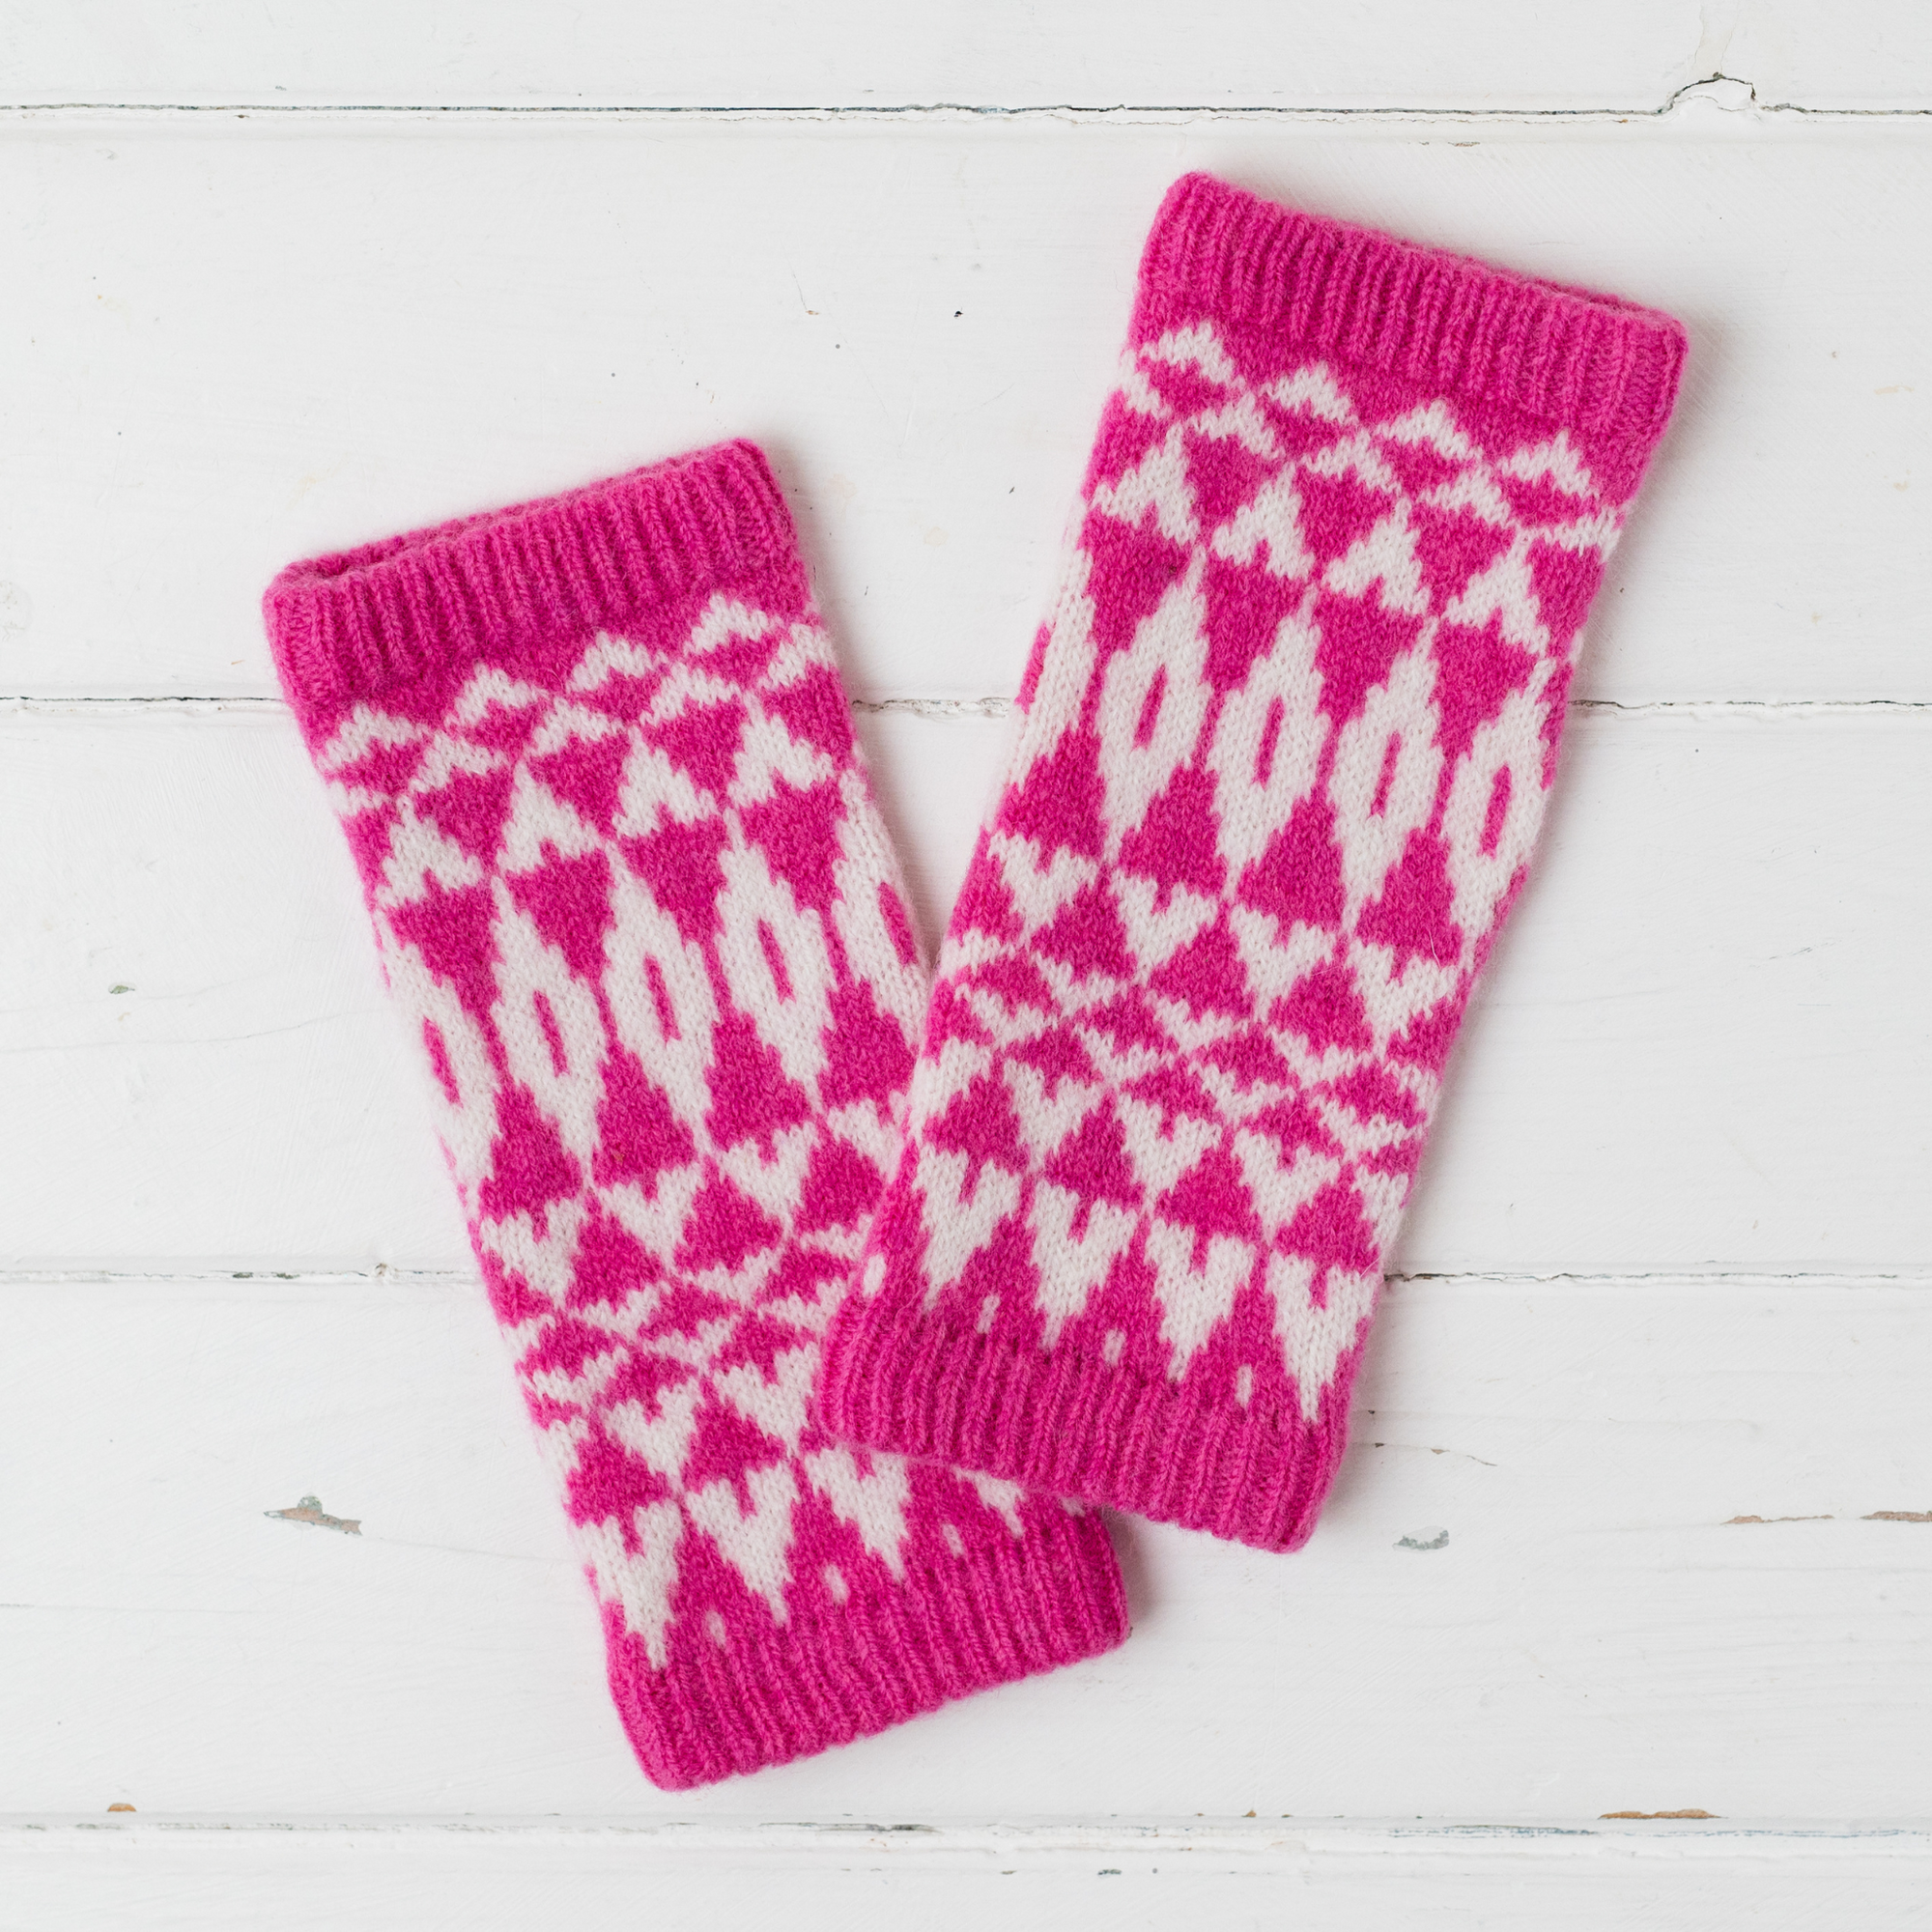 Mirror wrist warmers - bubblegum pink and white (MADE TO ORDER)